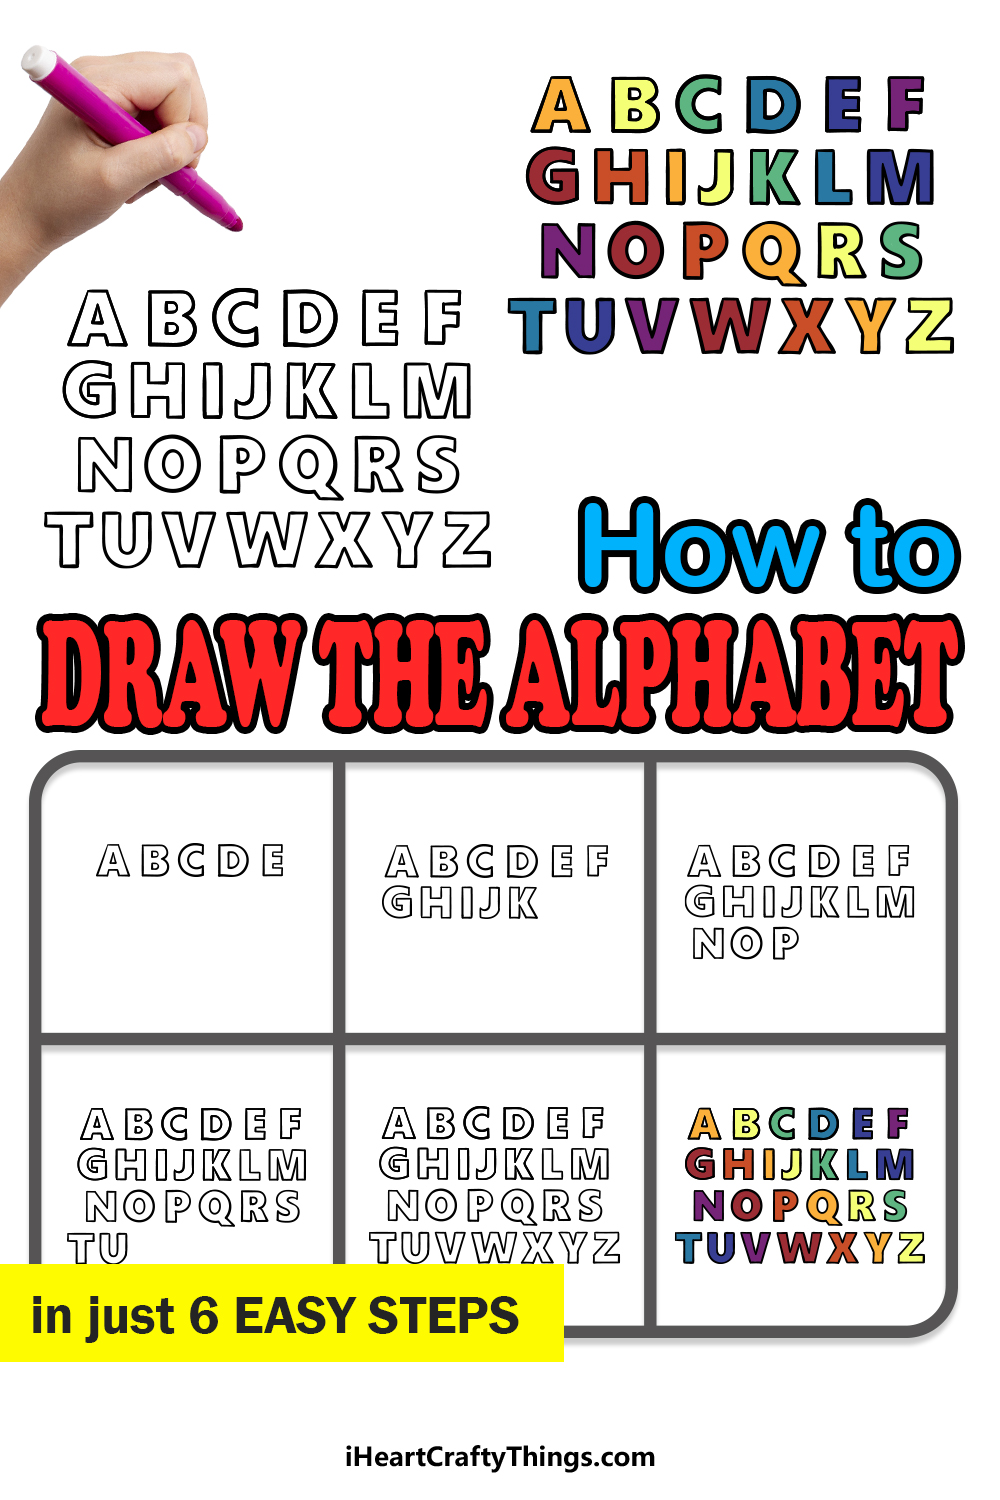 How to Draw The Alphabet in 6 easy steps